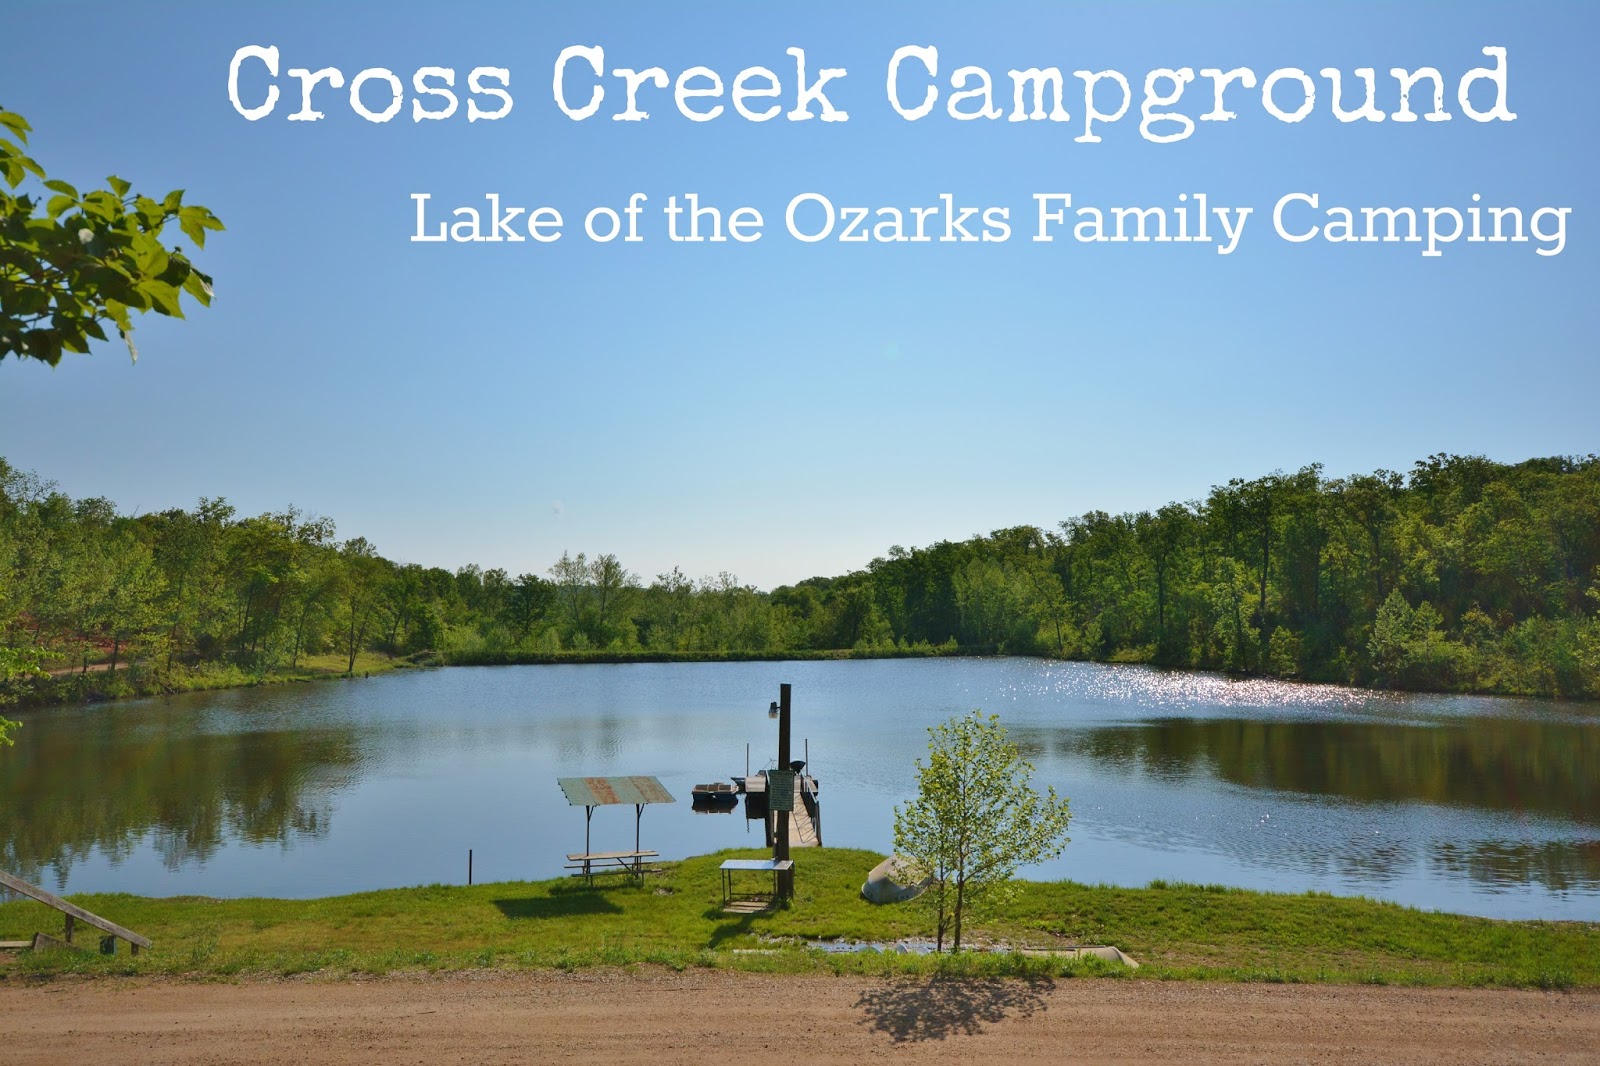 Cross Creek Campground is a great full service #camping location in Lake of the Ozarks, with loads of activities for kids. #familycamping #travel #70DayRoadTrip